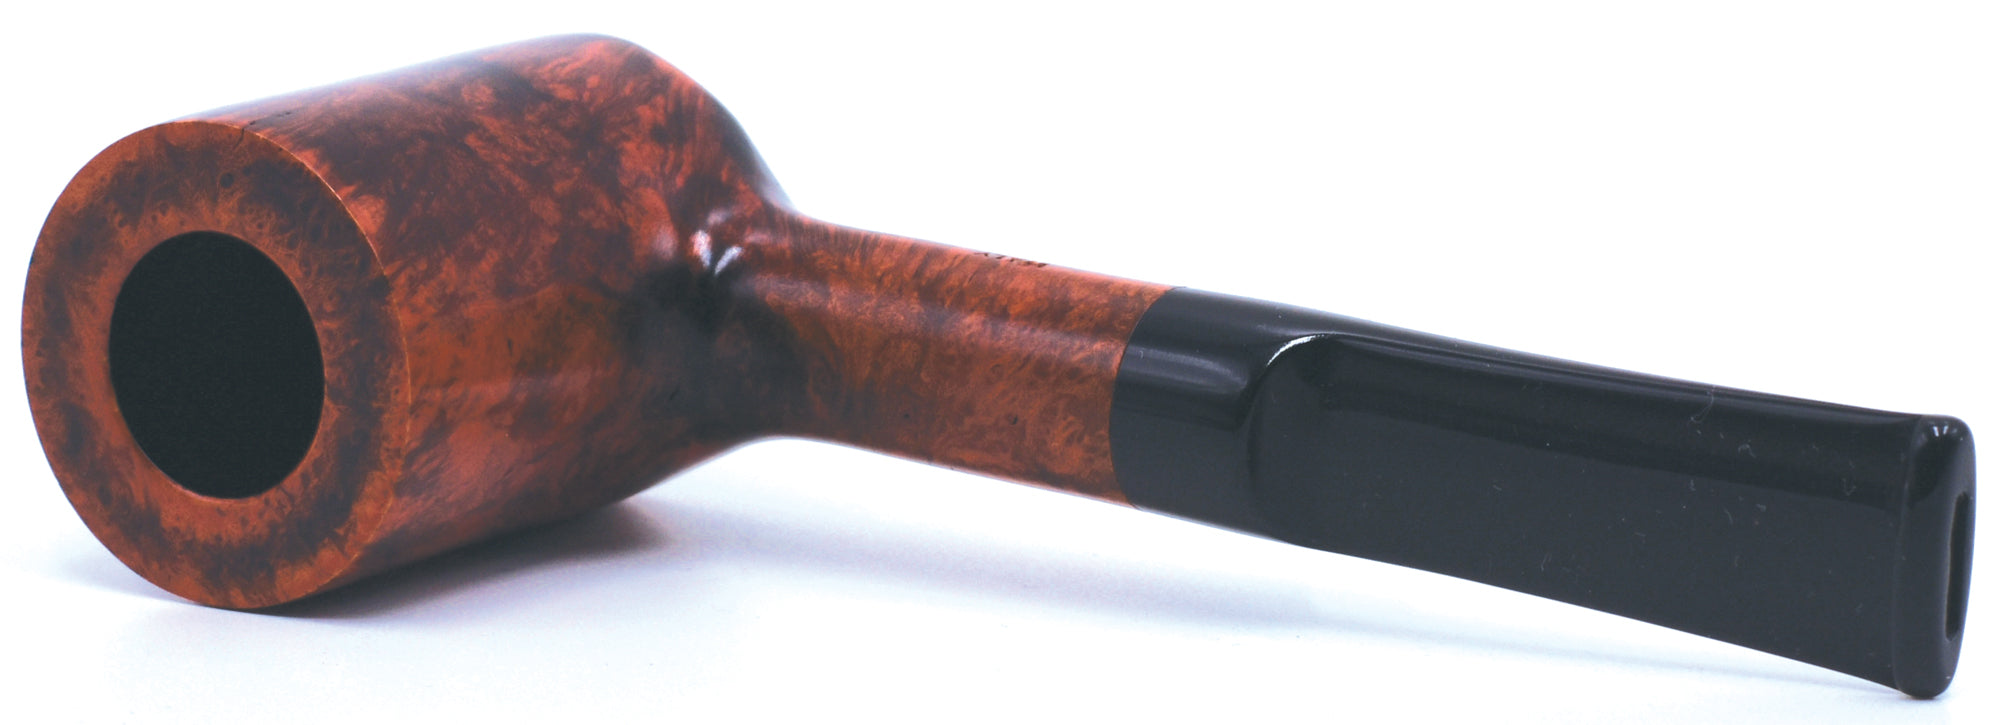 LEGENDEX® PAGANINI* 9 MM Filtered Briar Smoking Pipe Made In Italy 01-08-331